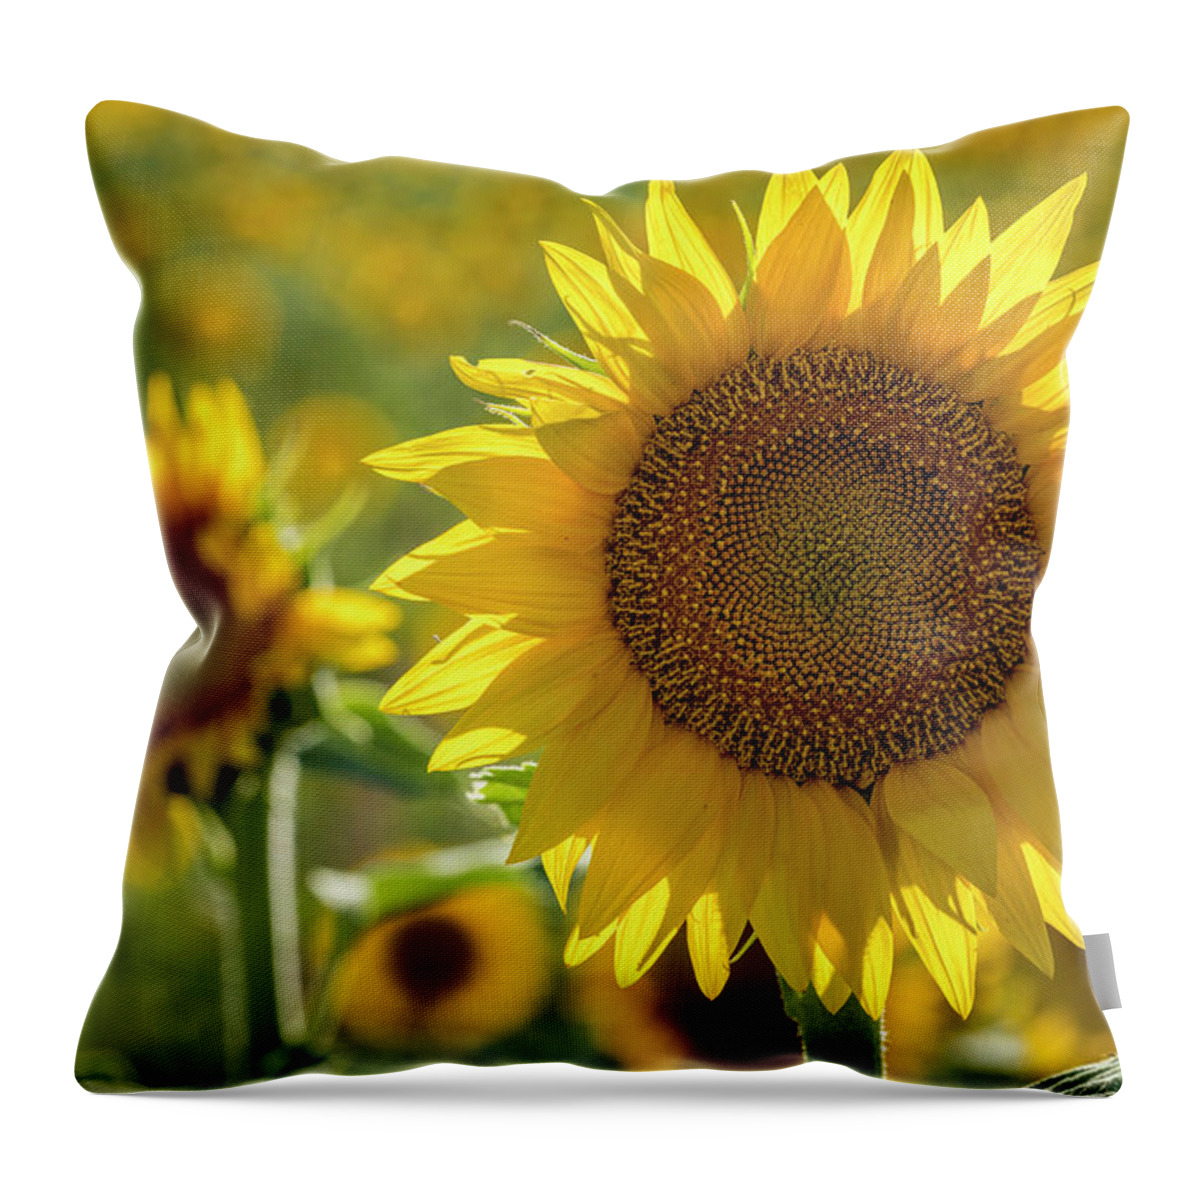 Colorado Throw Pillow featuring the photograph Perfect Sunflower Bloom by Teri Virbickis